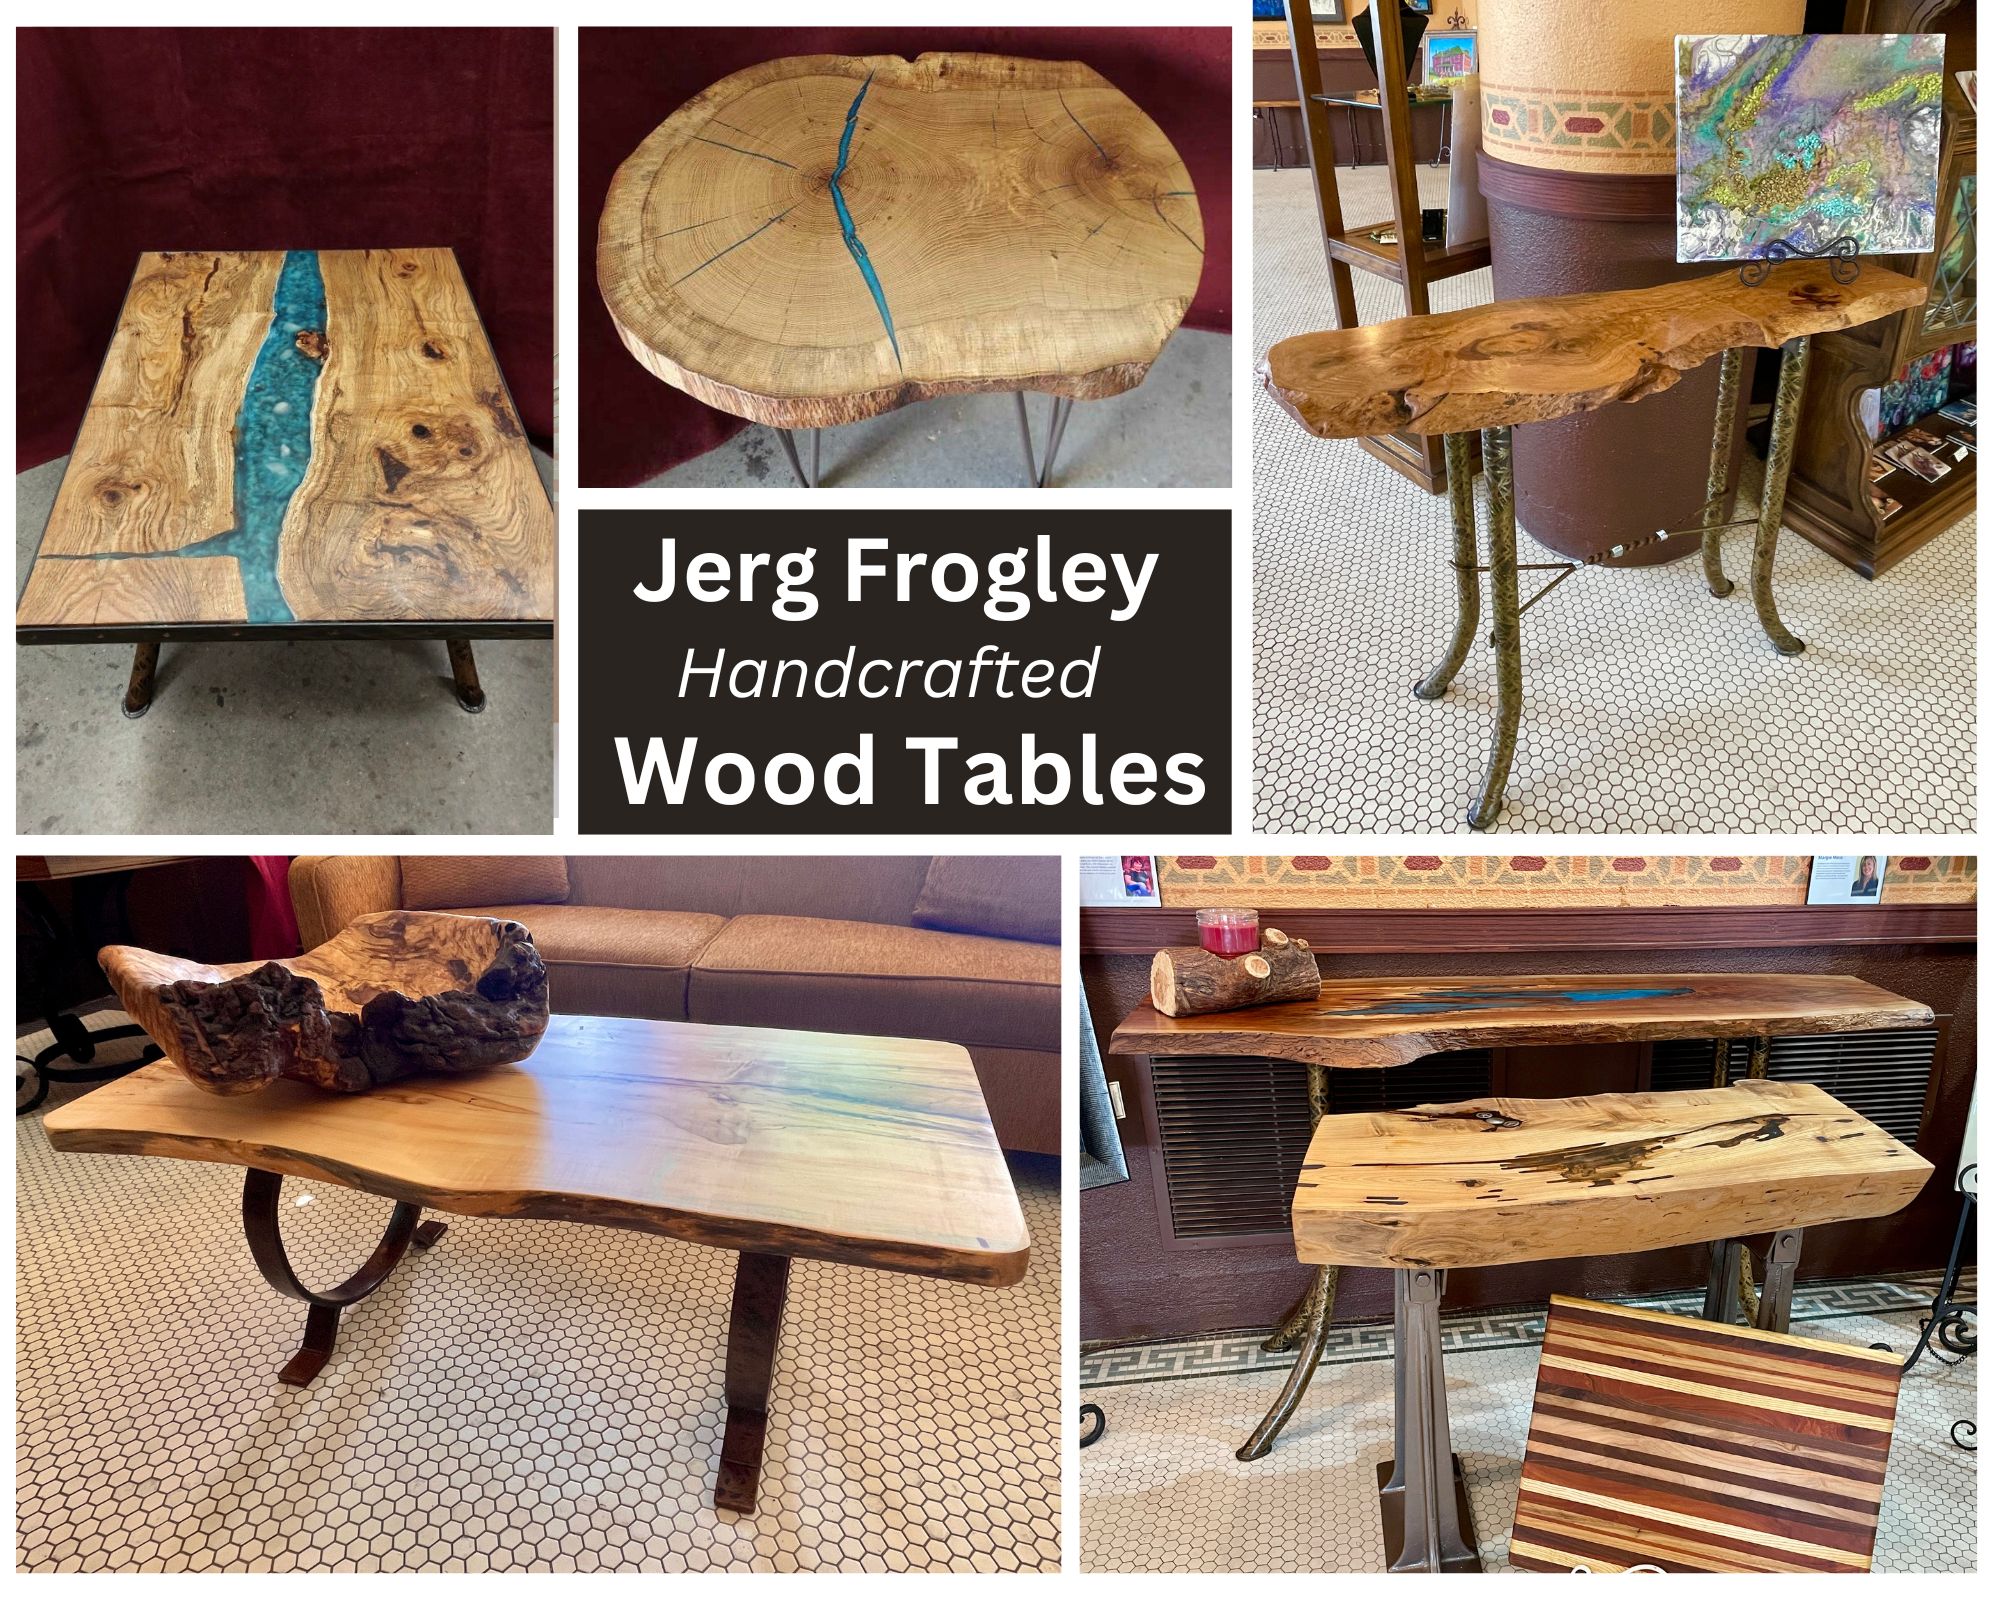 Jerg Frogley Handcrafted Wood Tables